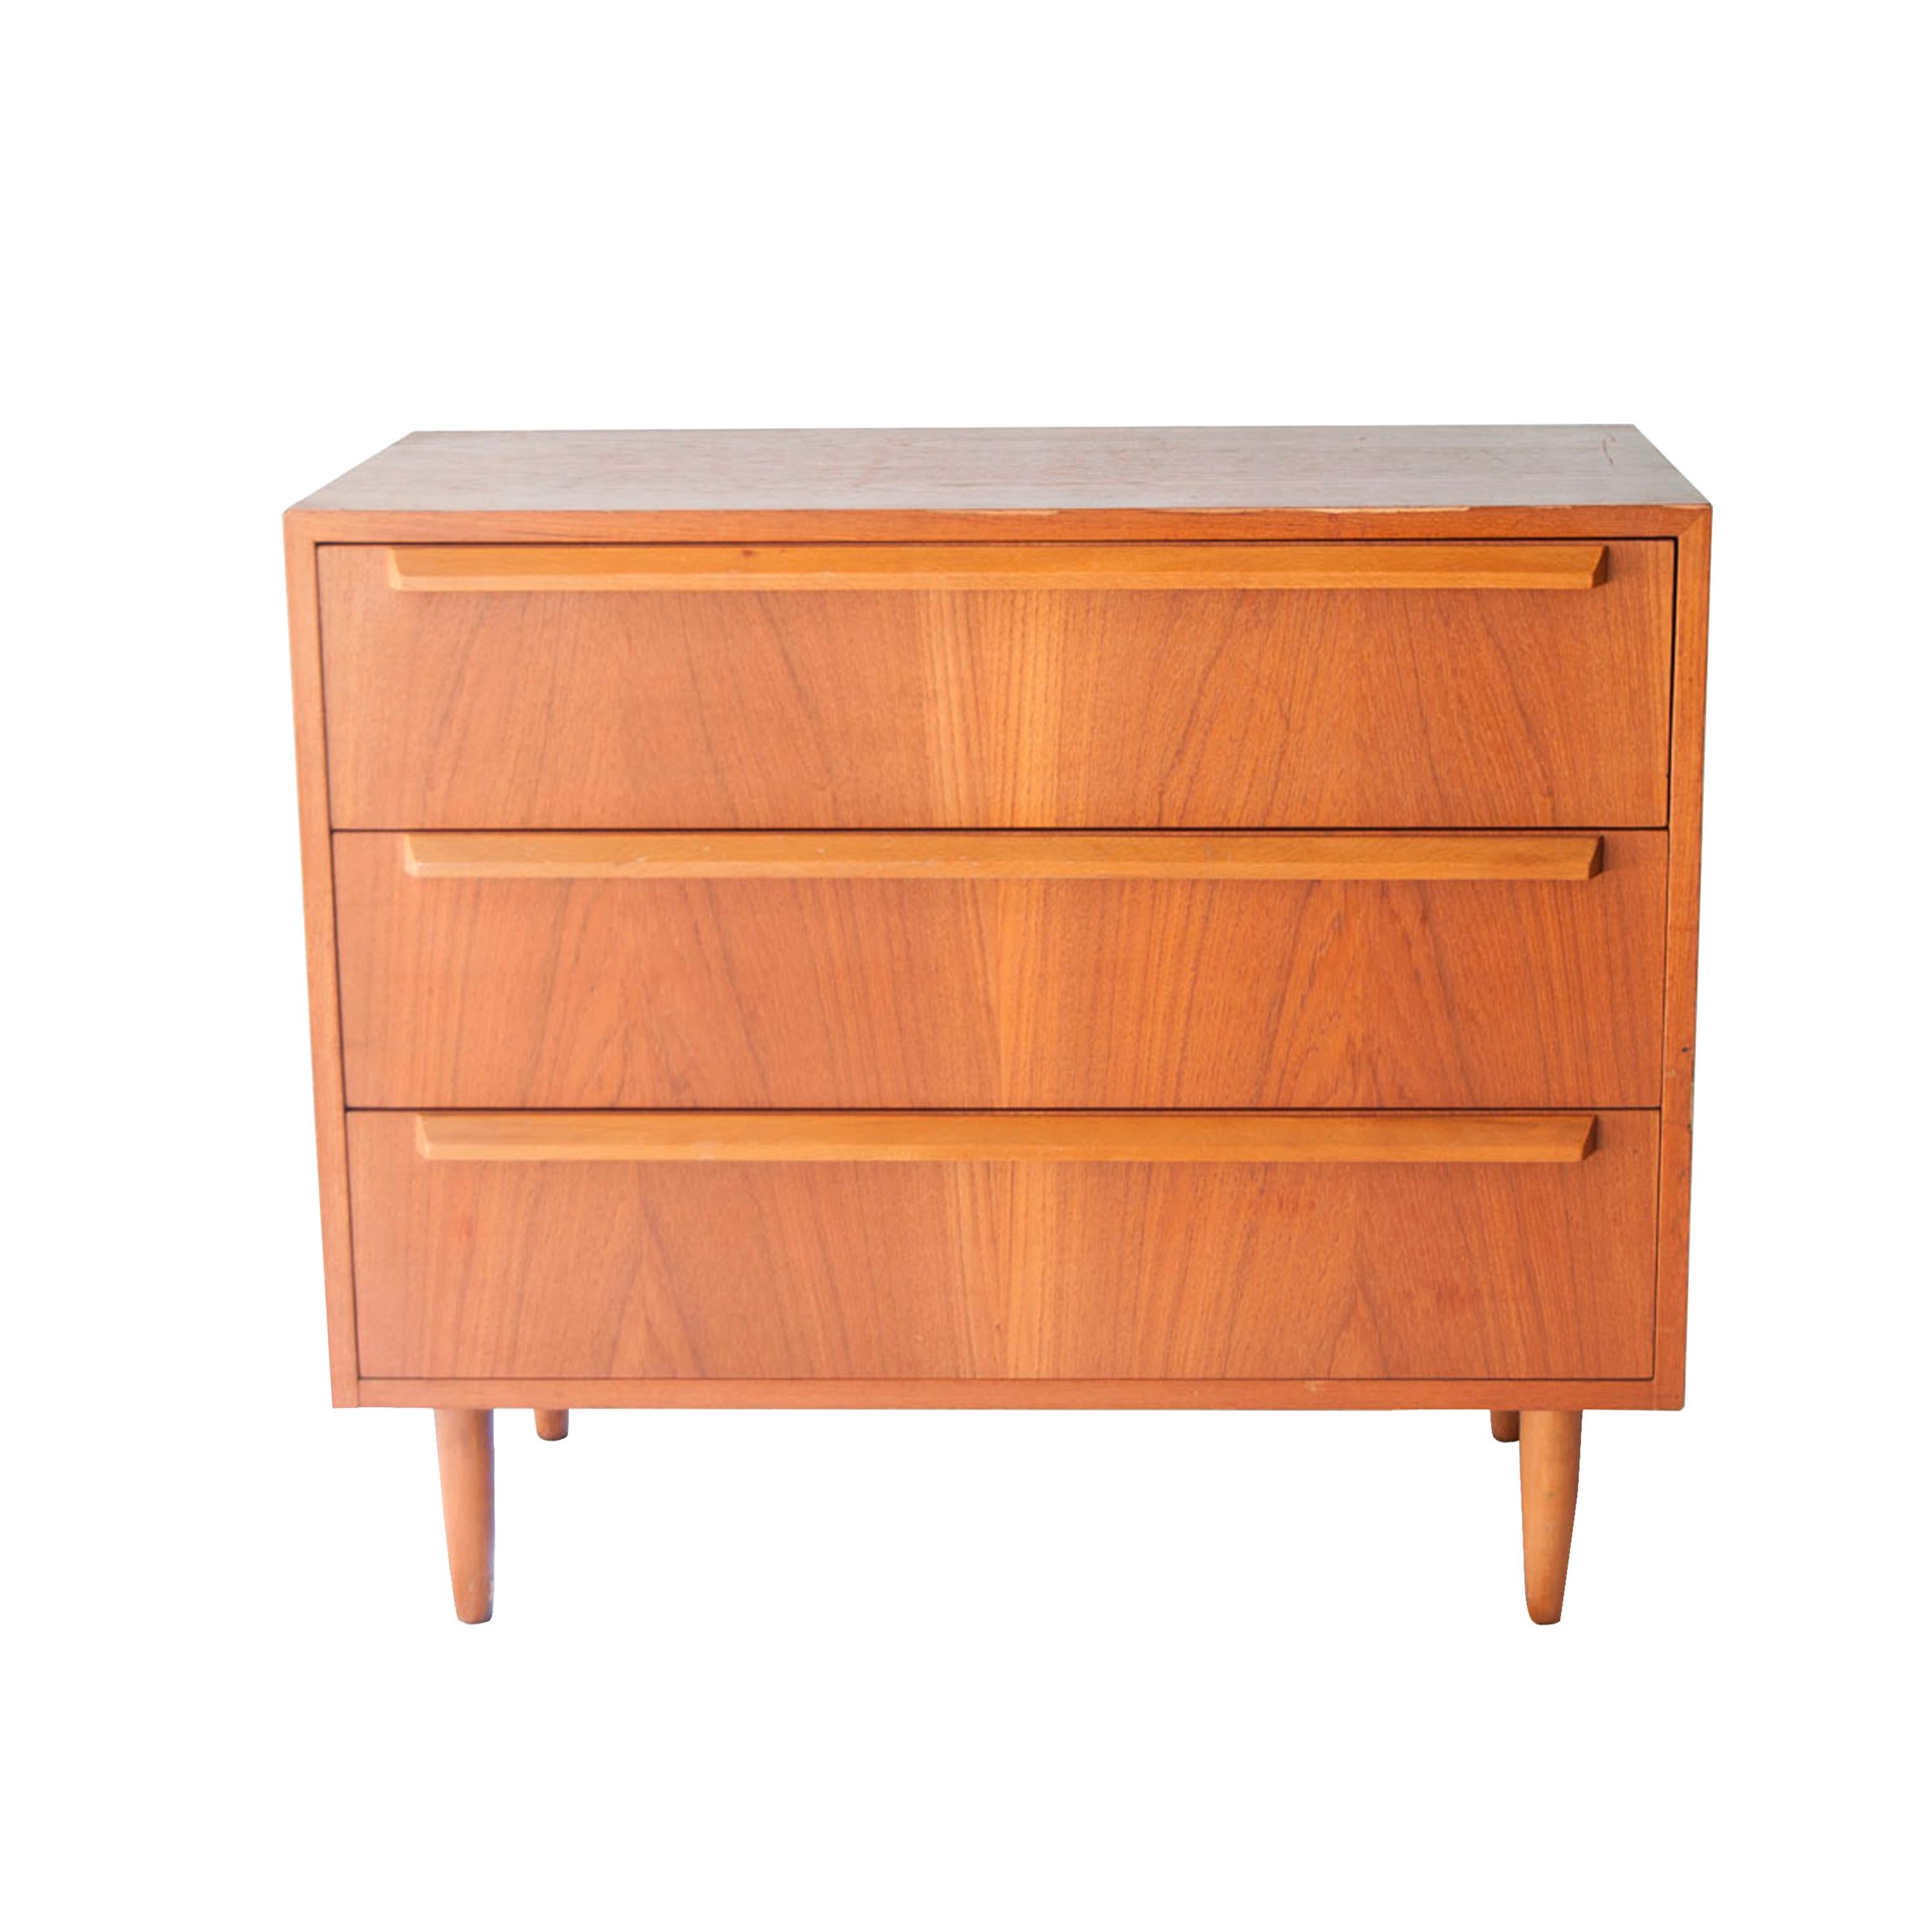 Scandinavian tree-drawer sideboard, made of Teak wood, with conical legs and handcrafted handles.